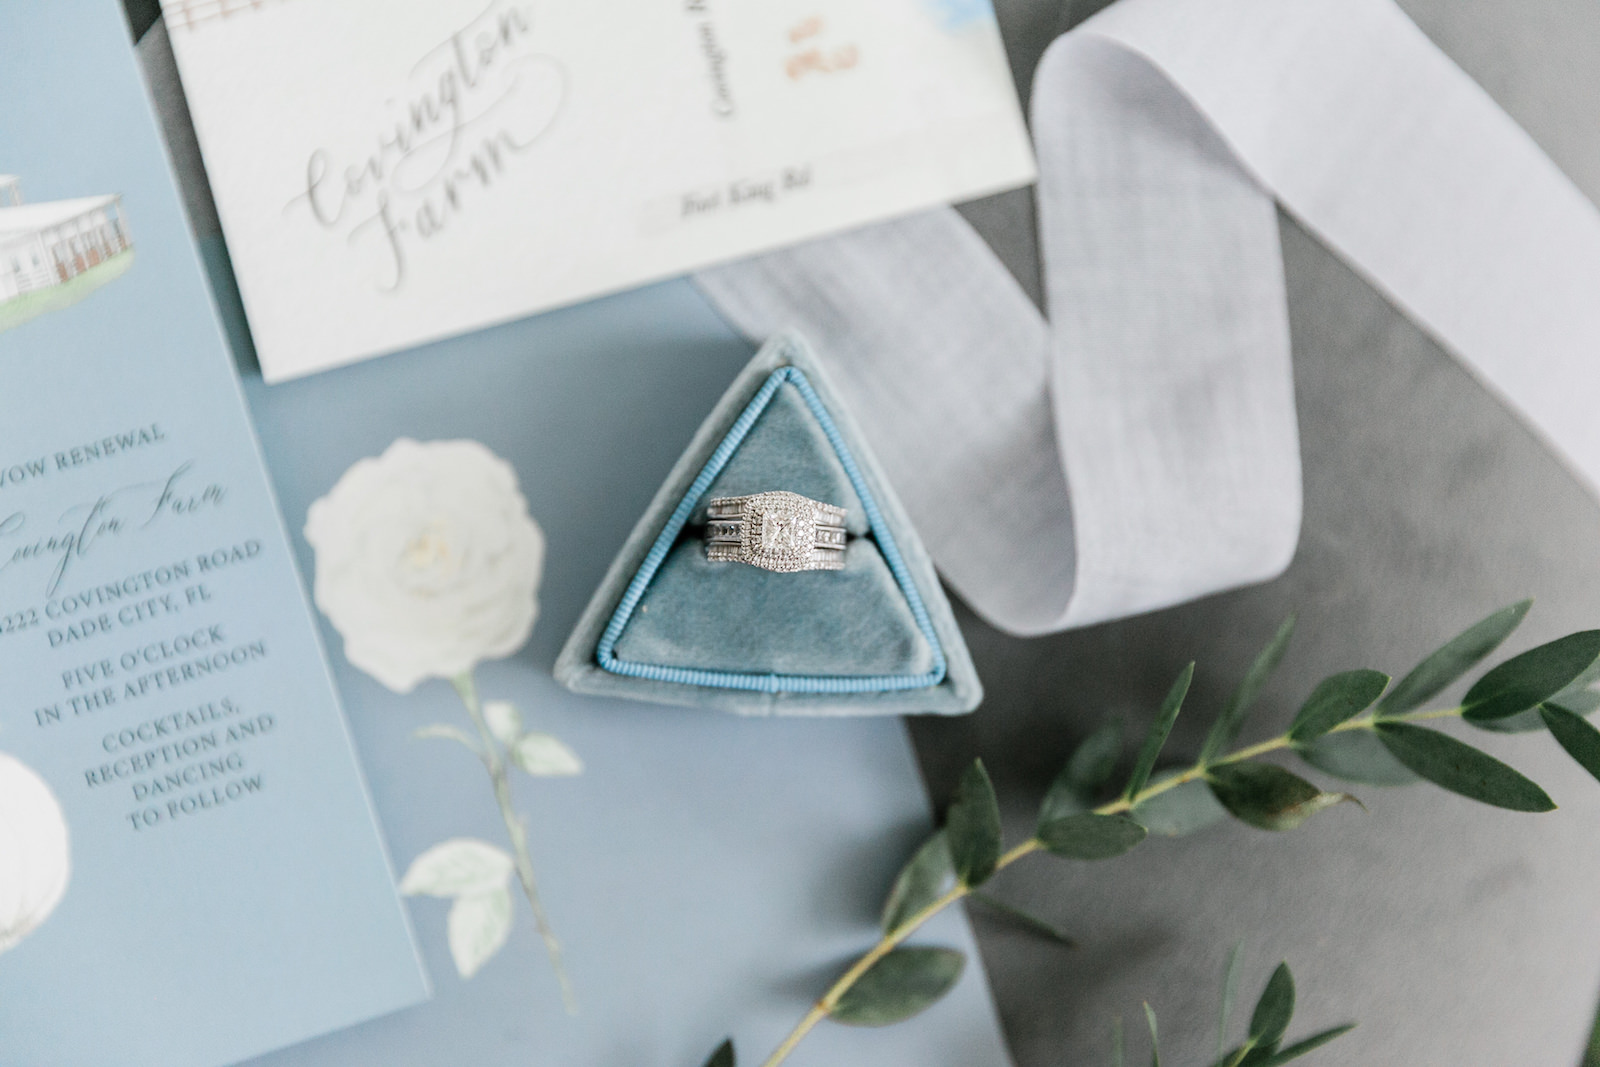 Diamond Engagement Ring with Diamond Band and Wedding Band in Dusty Blue Velvet Box